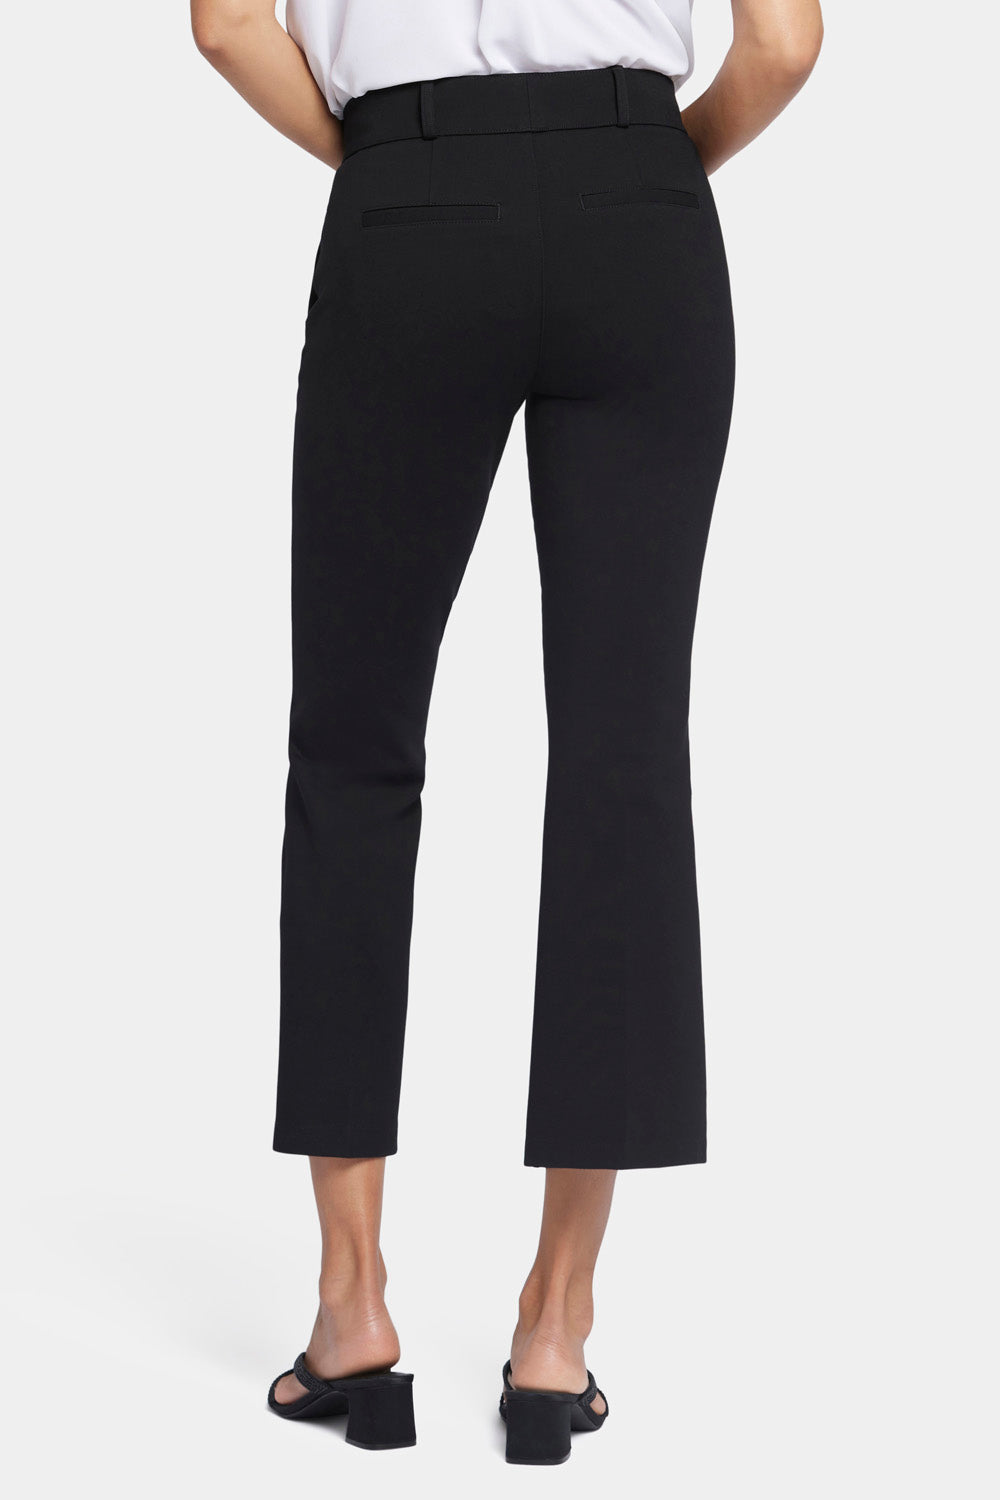 NYDJ Pull-On Flared Ankle Trouser Pants Sculpt-Her™ Collection - Black